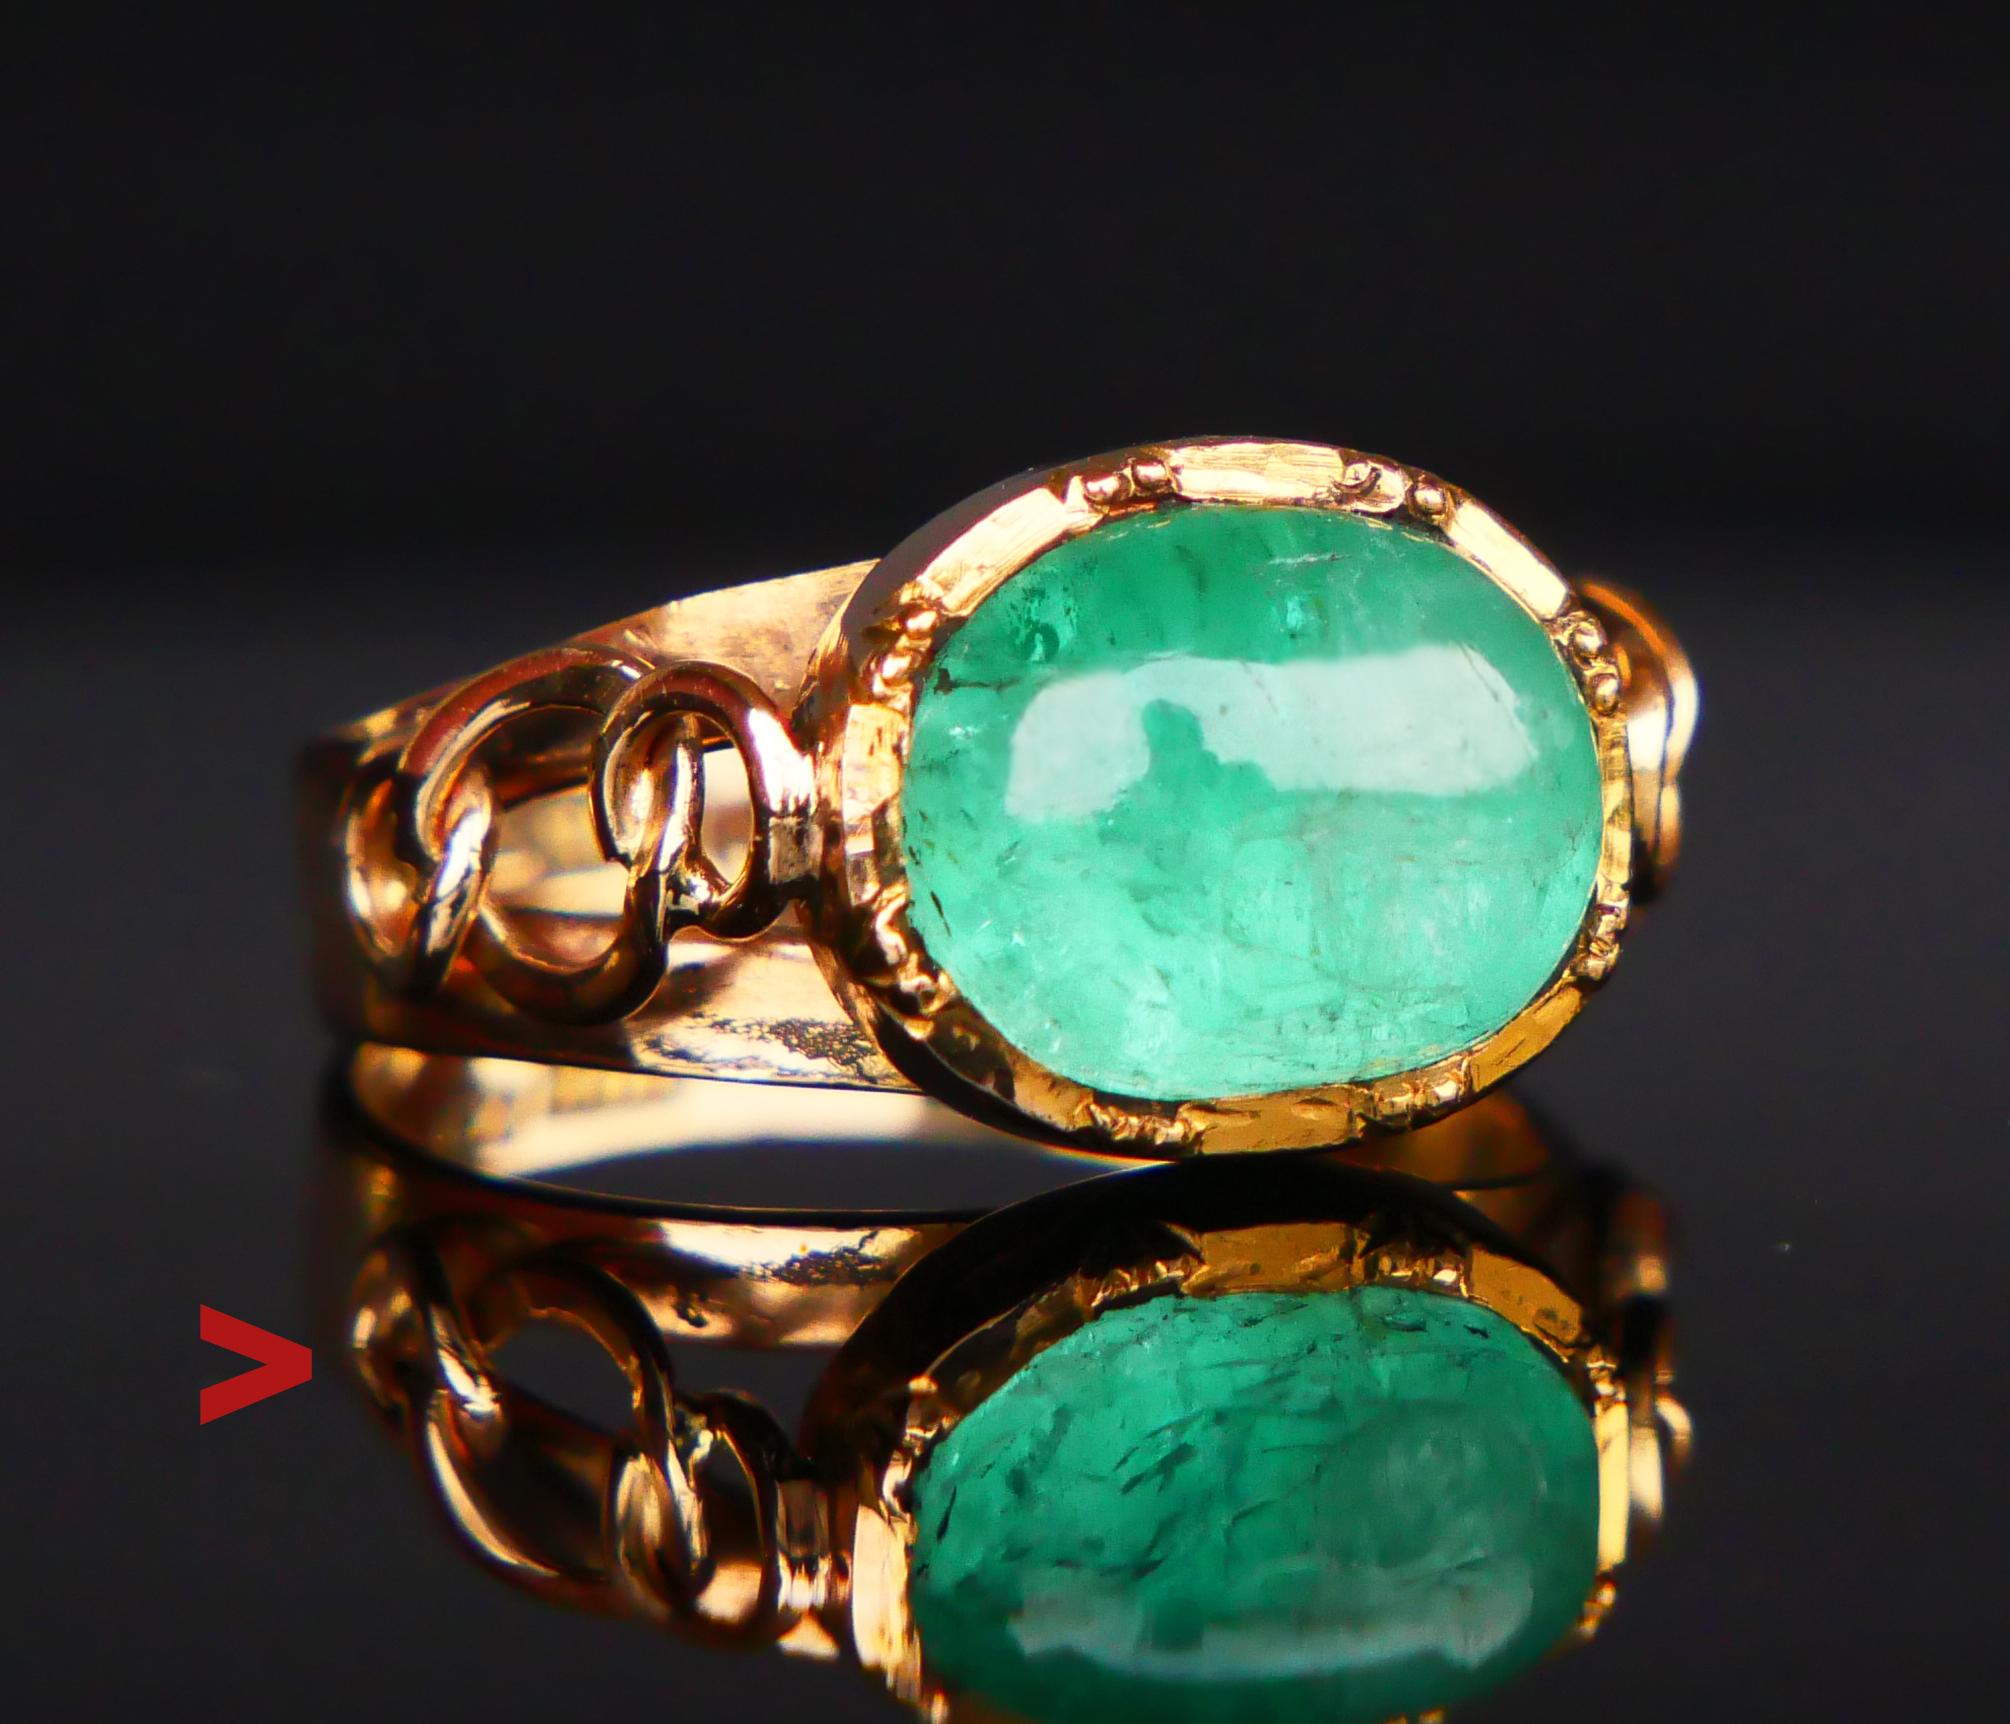 Vintage Swedish 18K Ring with vivid Green natural Emerald cut cabochon 11 mm x 9 mm x 6 mm deep / about 5 ct.

Plain-diveded band in solid 18 ct Orange Gold with three chained rings on each of the shoulders. Unisex type, only size matters.

Set of